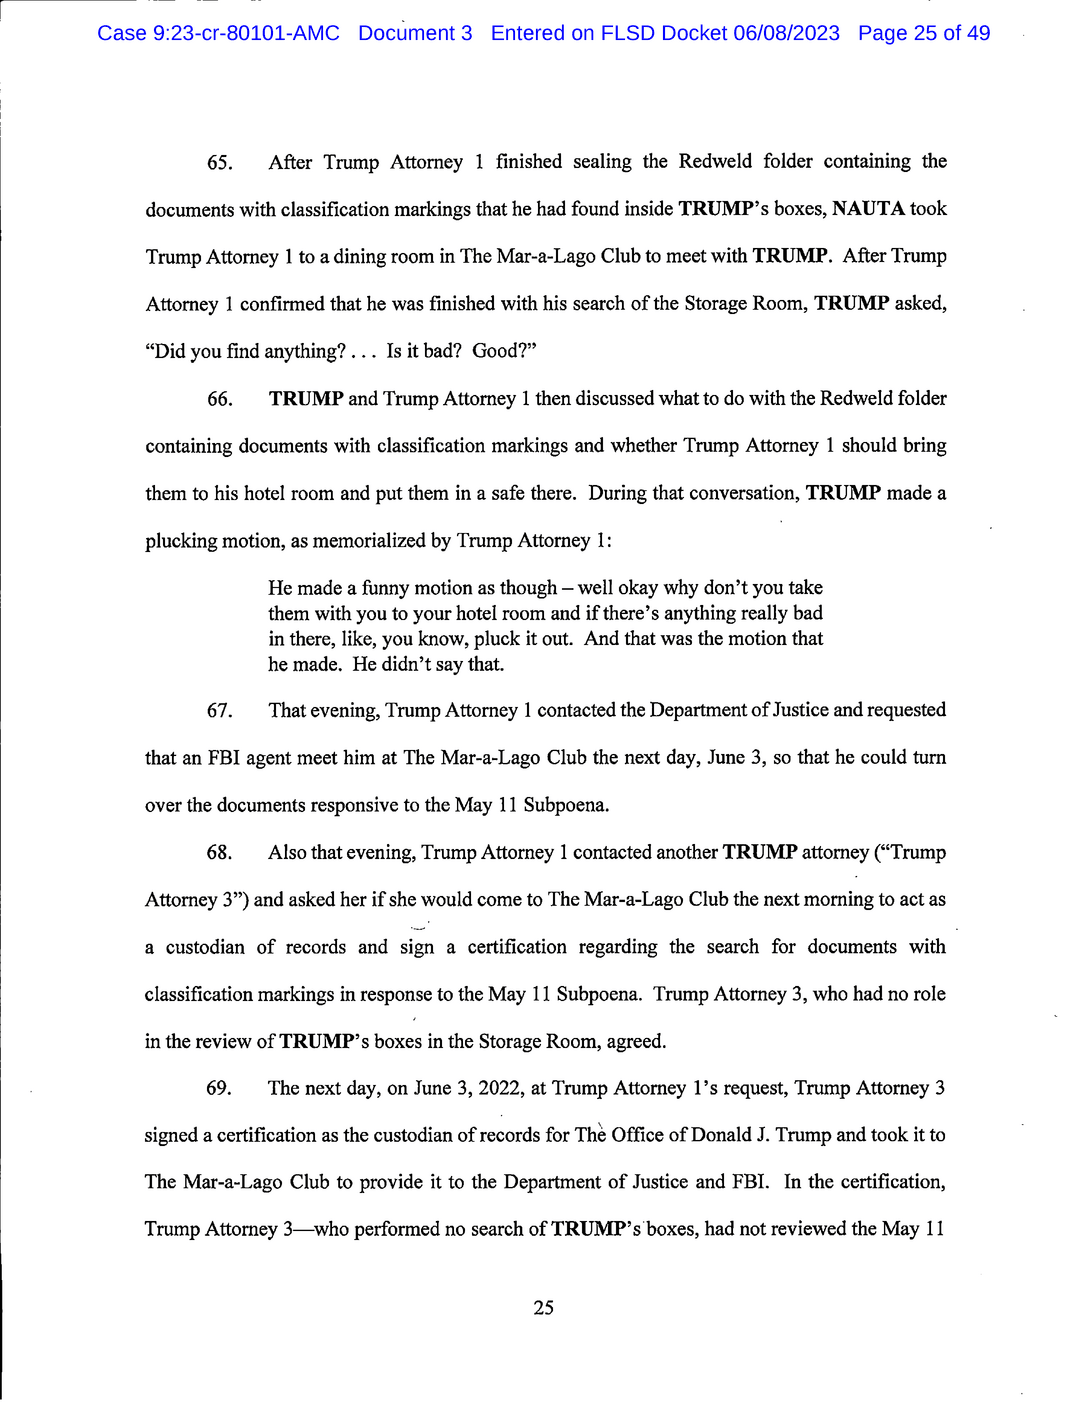 Page 25 of Donald Trump Classified Documents Indictment PDF document.